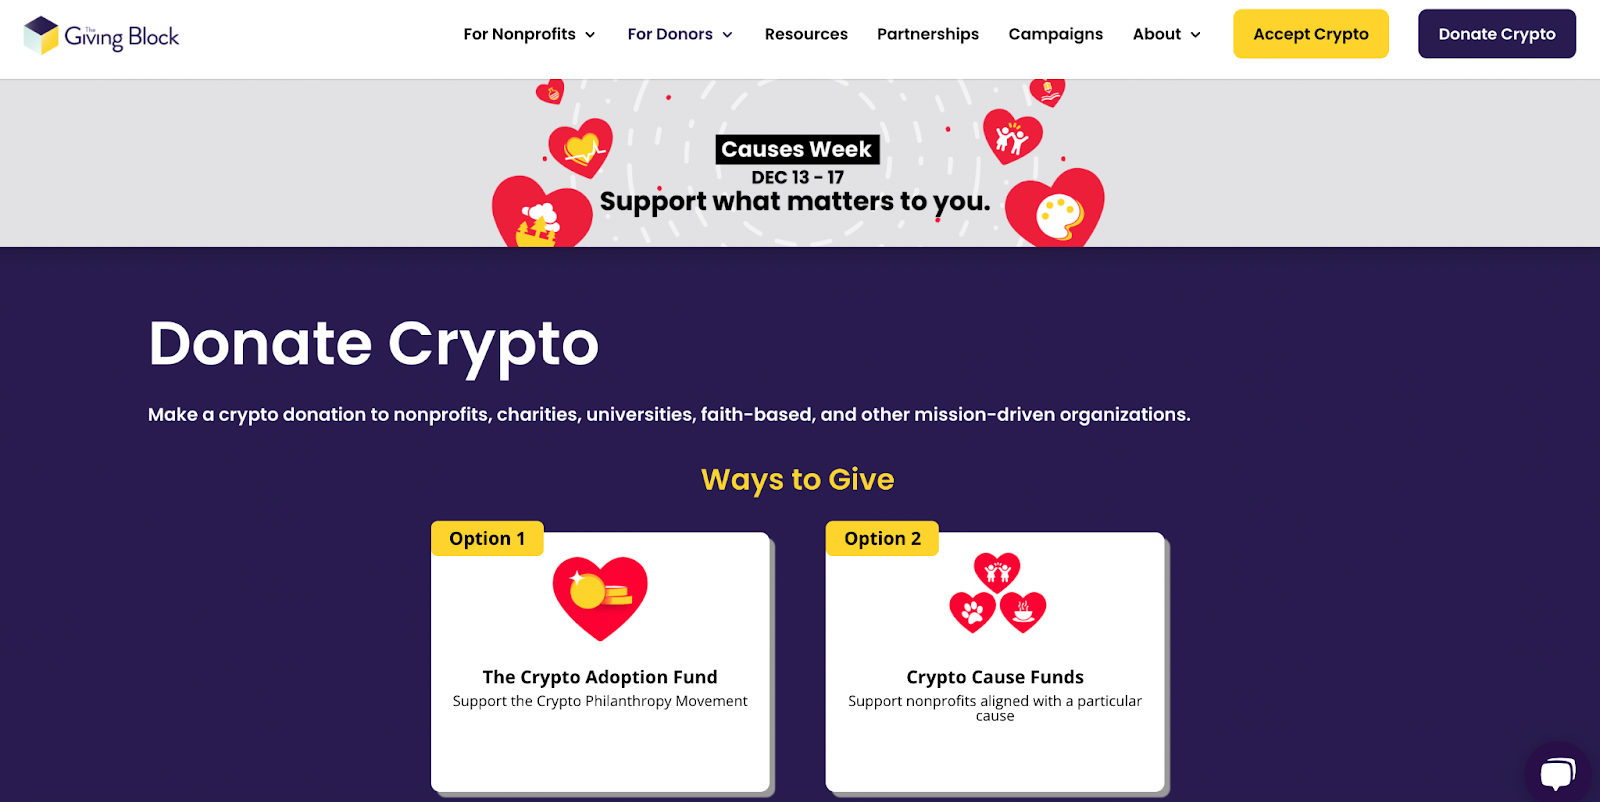 A screenshot of The Giving Block’s donation page